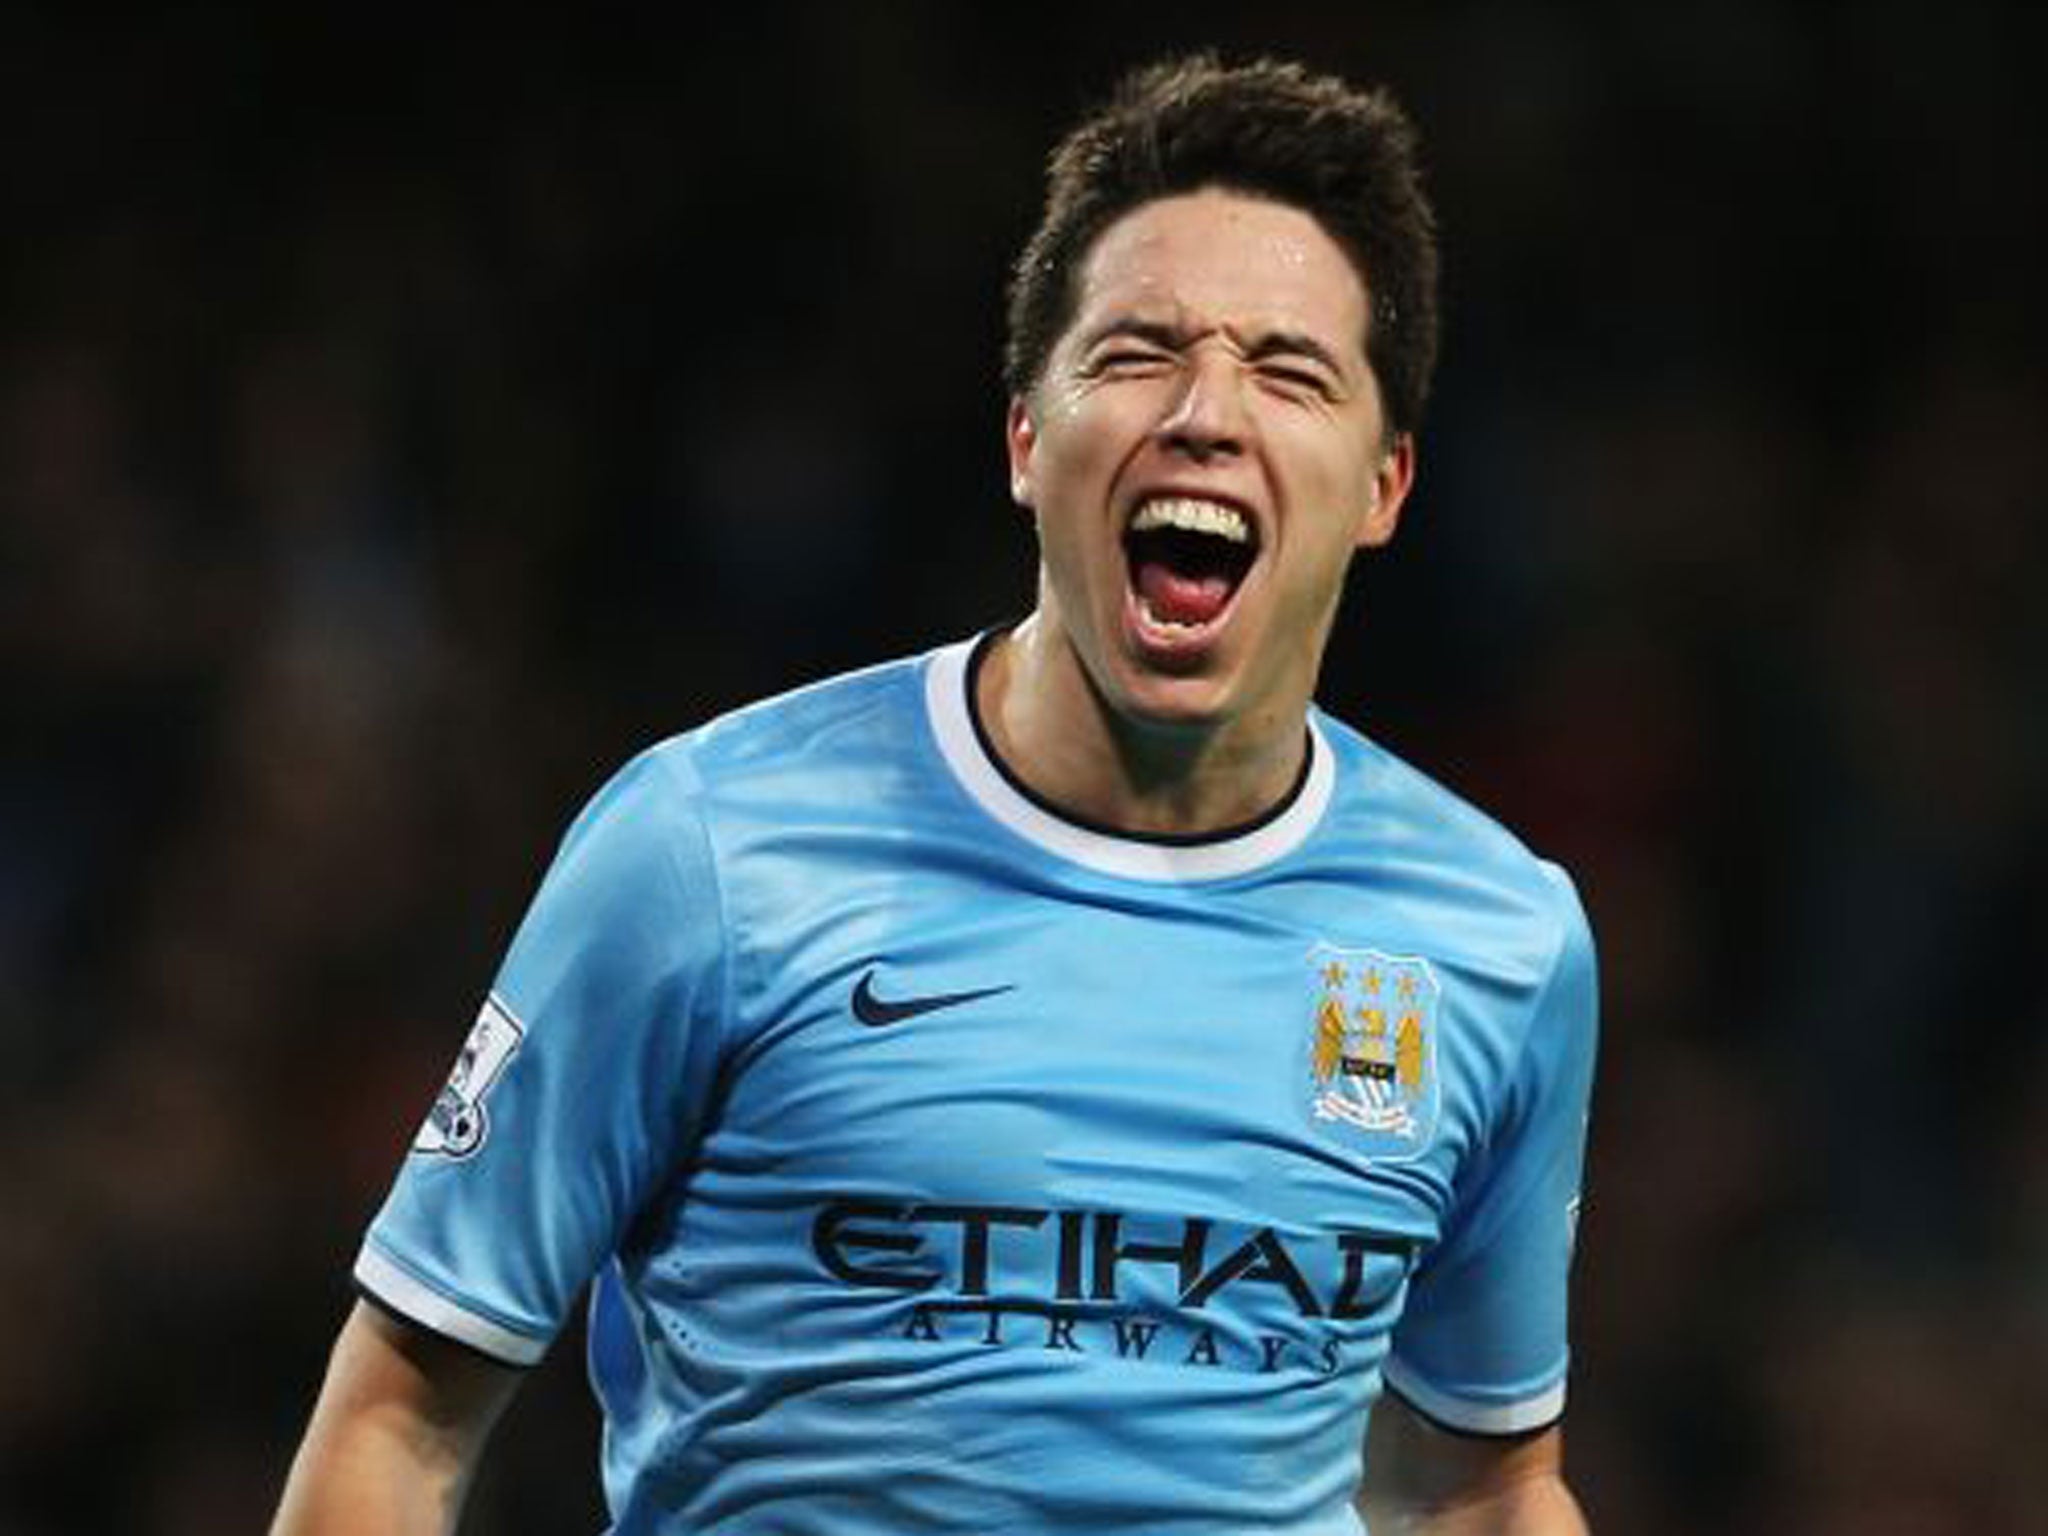 Samir Nasri is looking forward to the last 16 of the Champions League